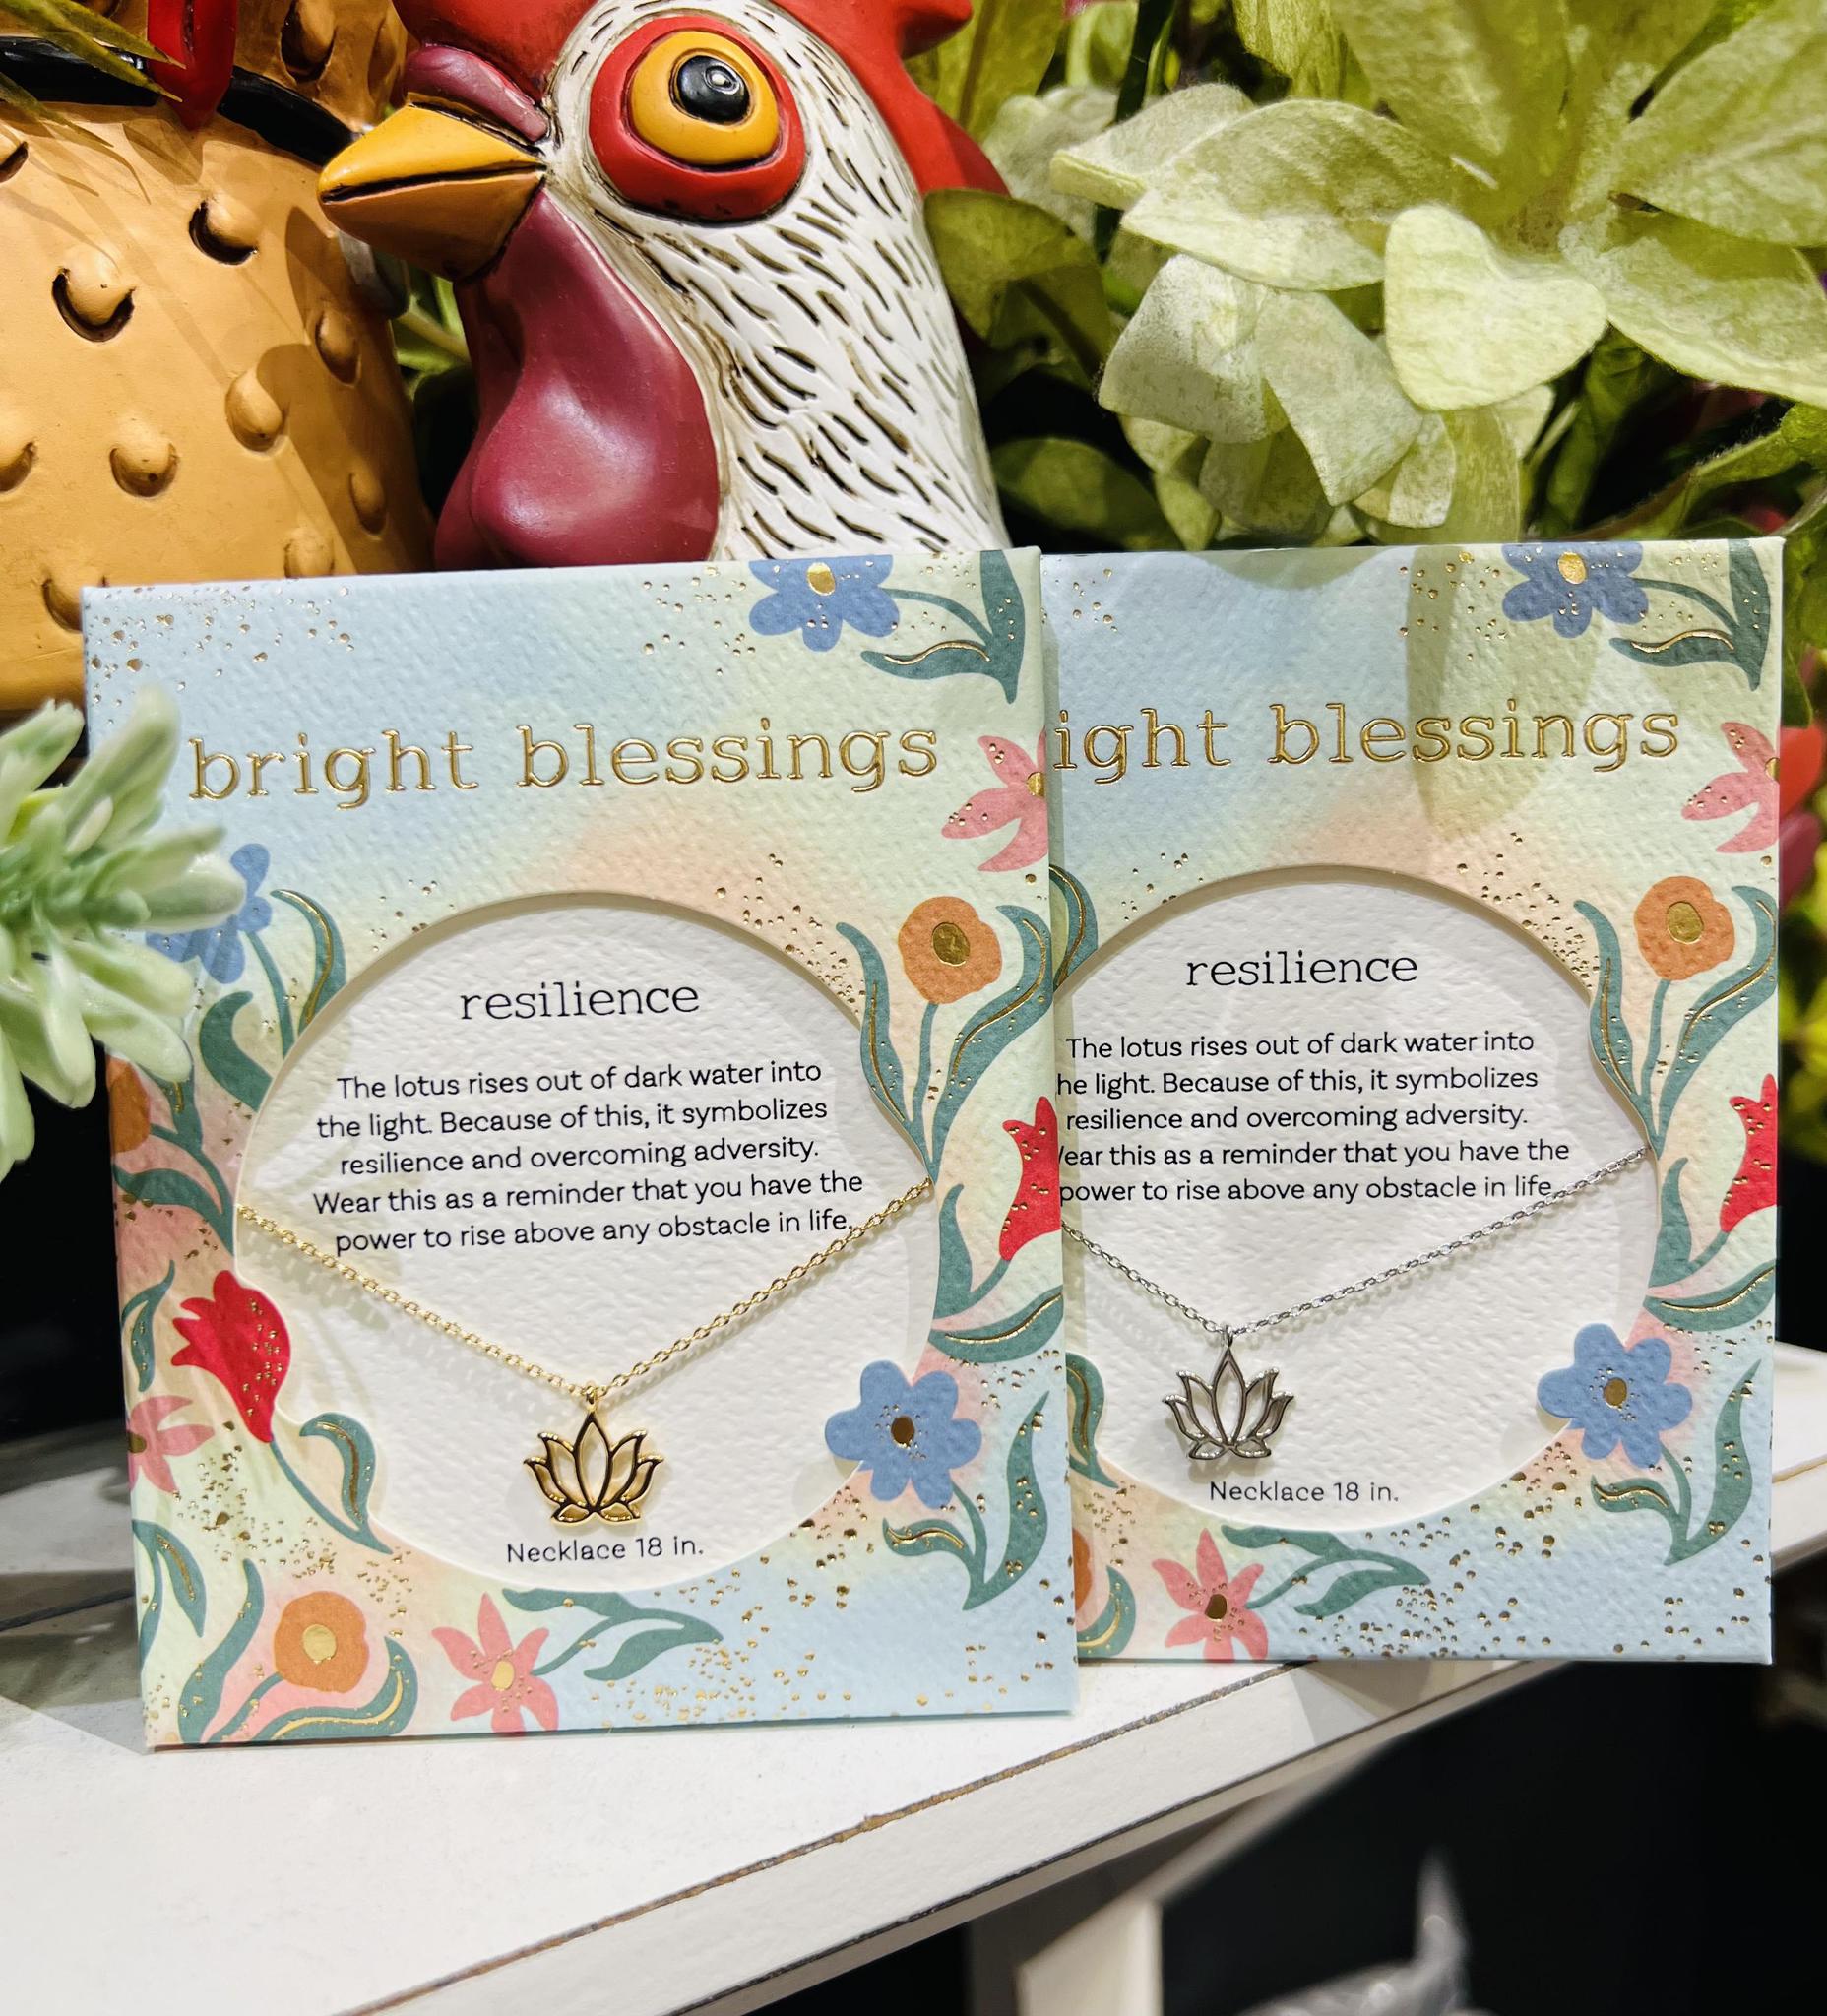 Bright Blessings Resilience Necklace